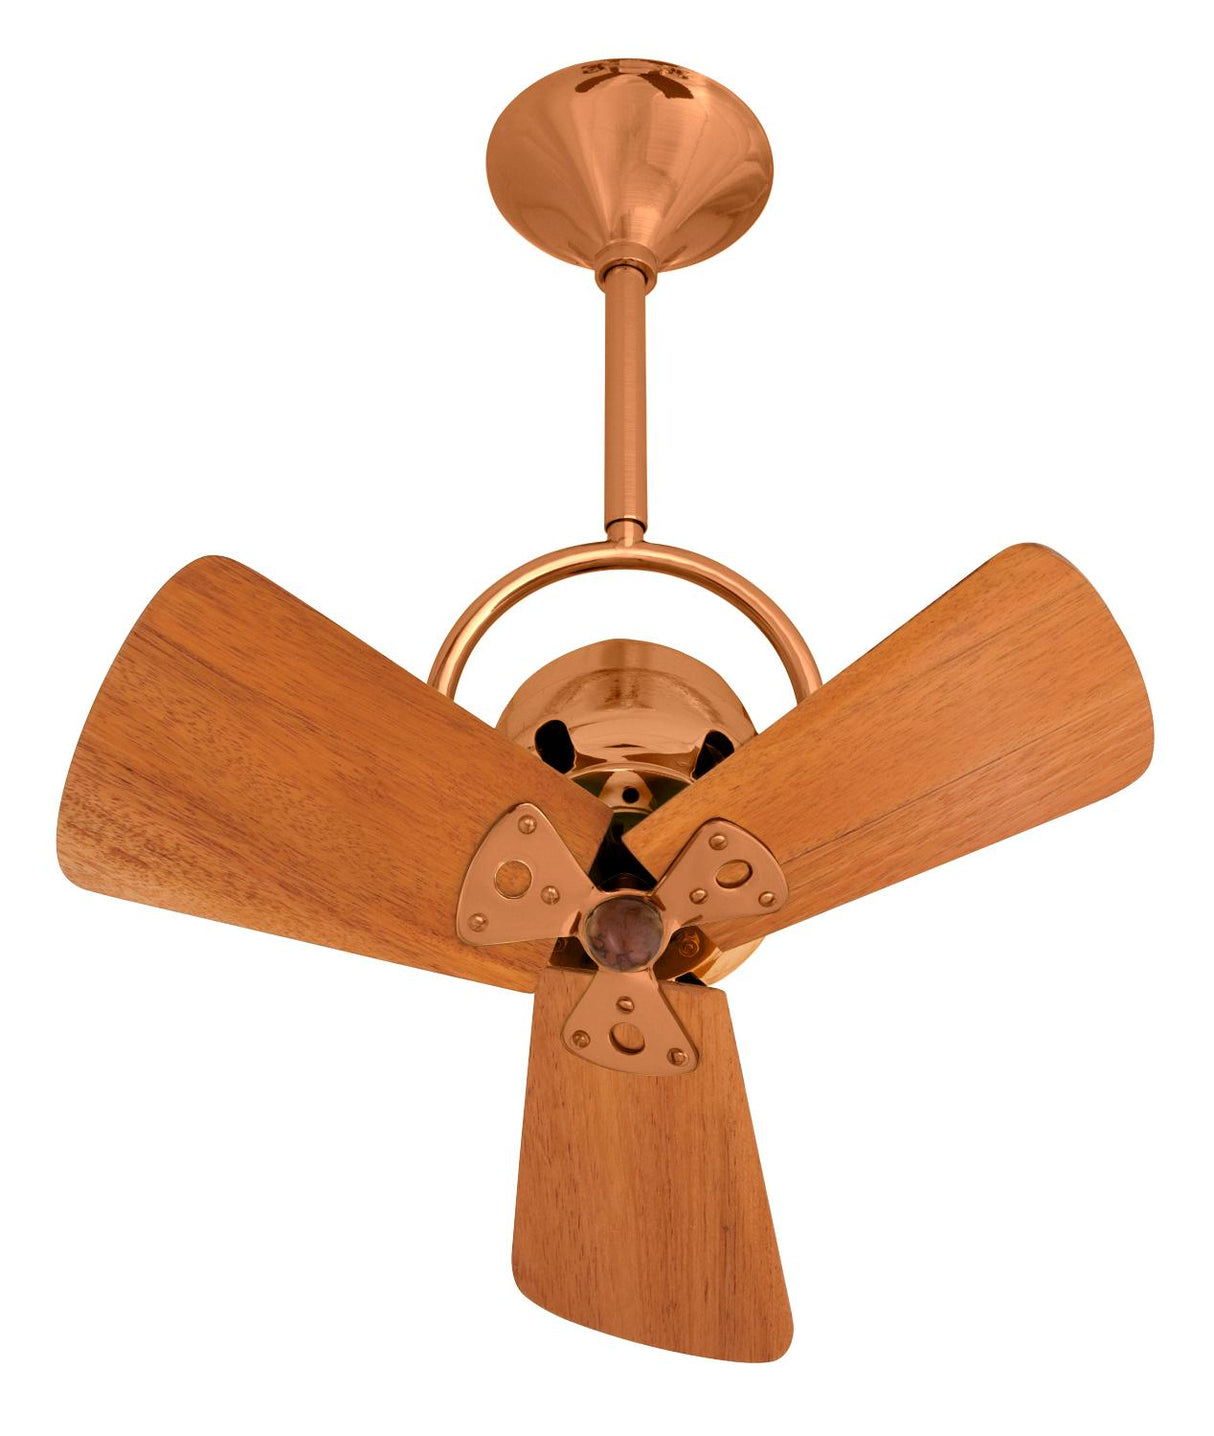 Matthews Fan BD-BRCP-WD Bianca Direcional ceiling fan in Brushed Copper finish with solid sustainable mahogany wood blades.